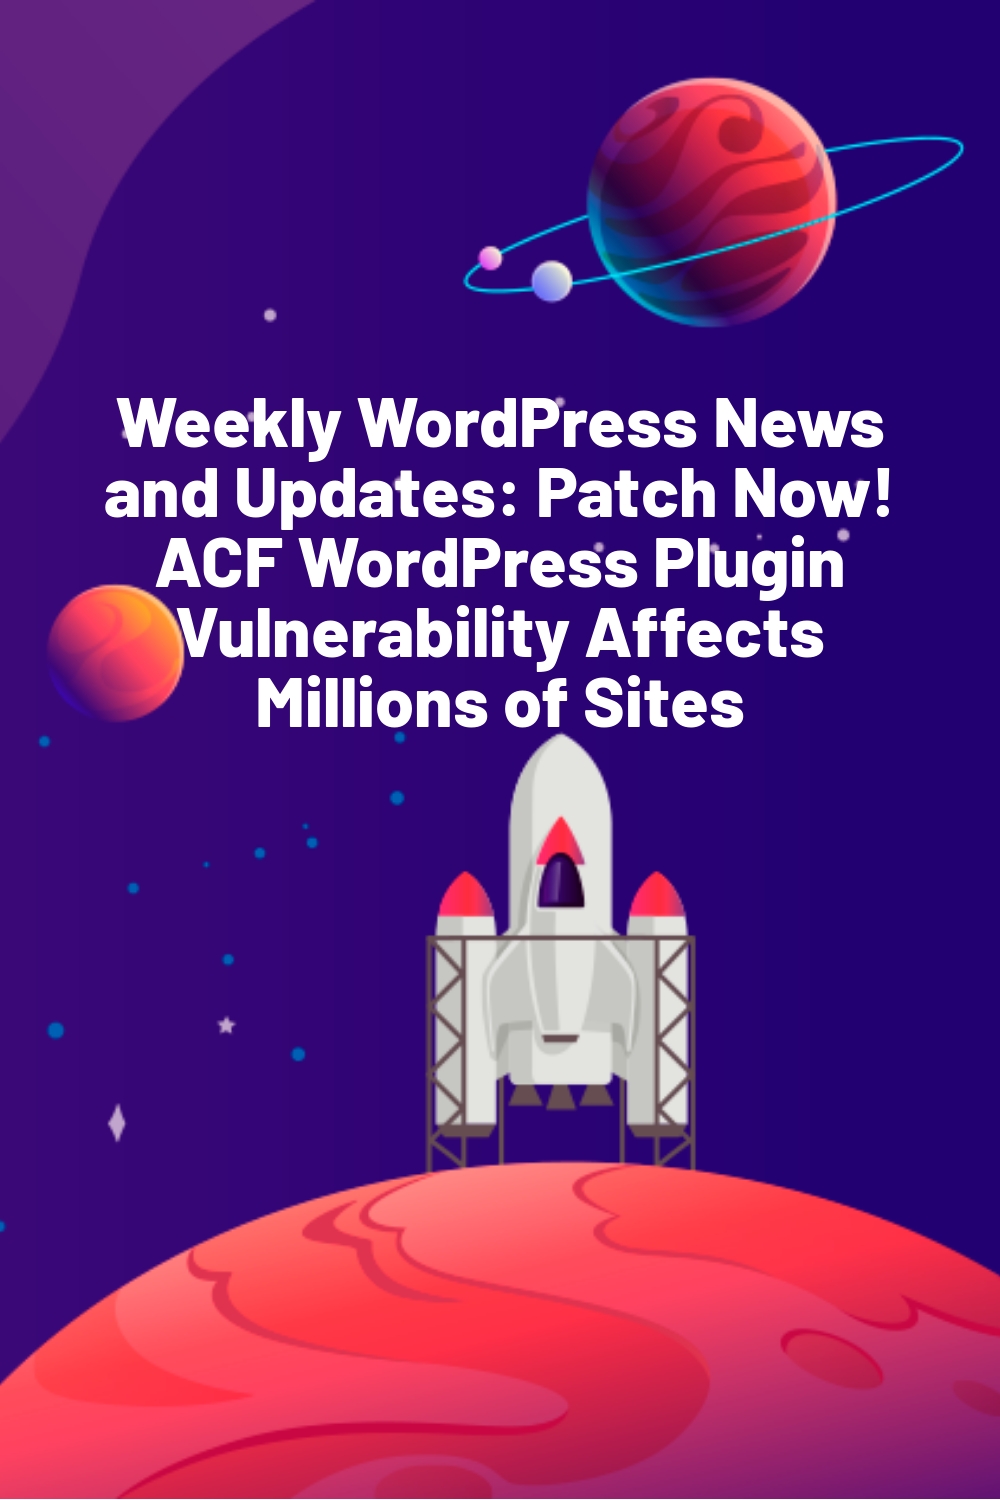 Weekly WordPress News and Updates: Patch Now! ACF WordPress Plugin Vulnerability Affects Millions of Sites